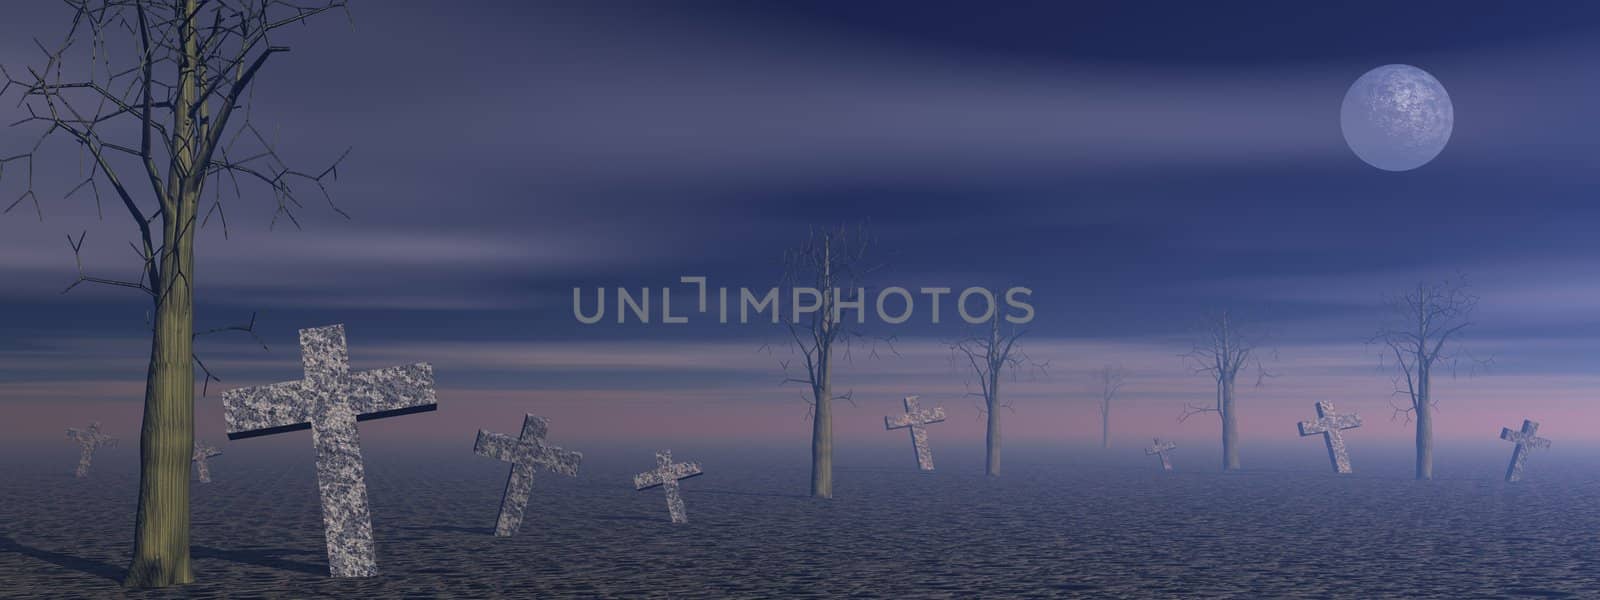 Few old crosses in a cemetery among dead trees by foggy night with full moon